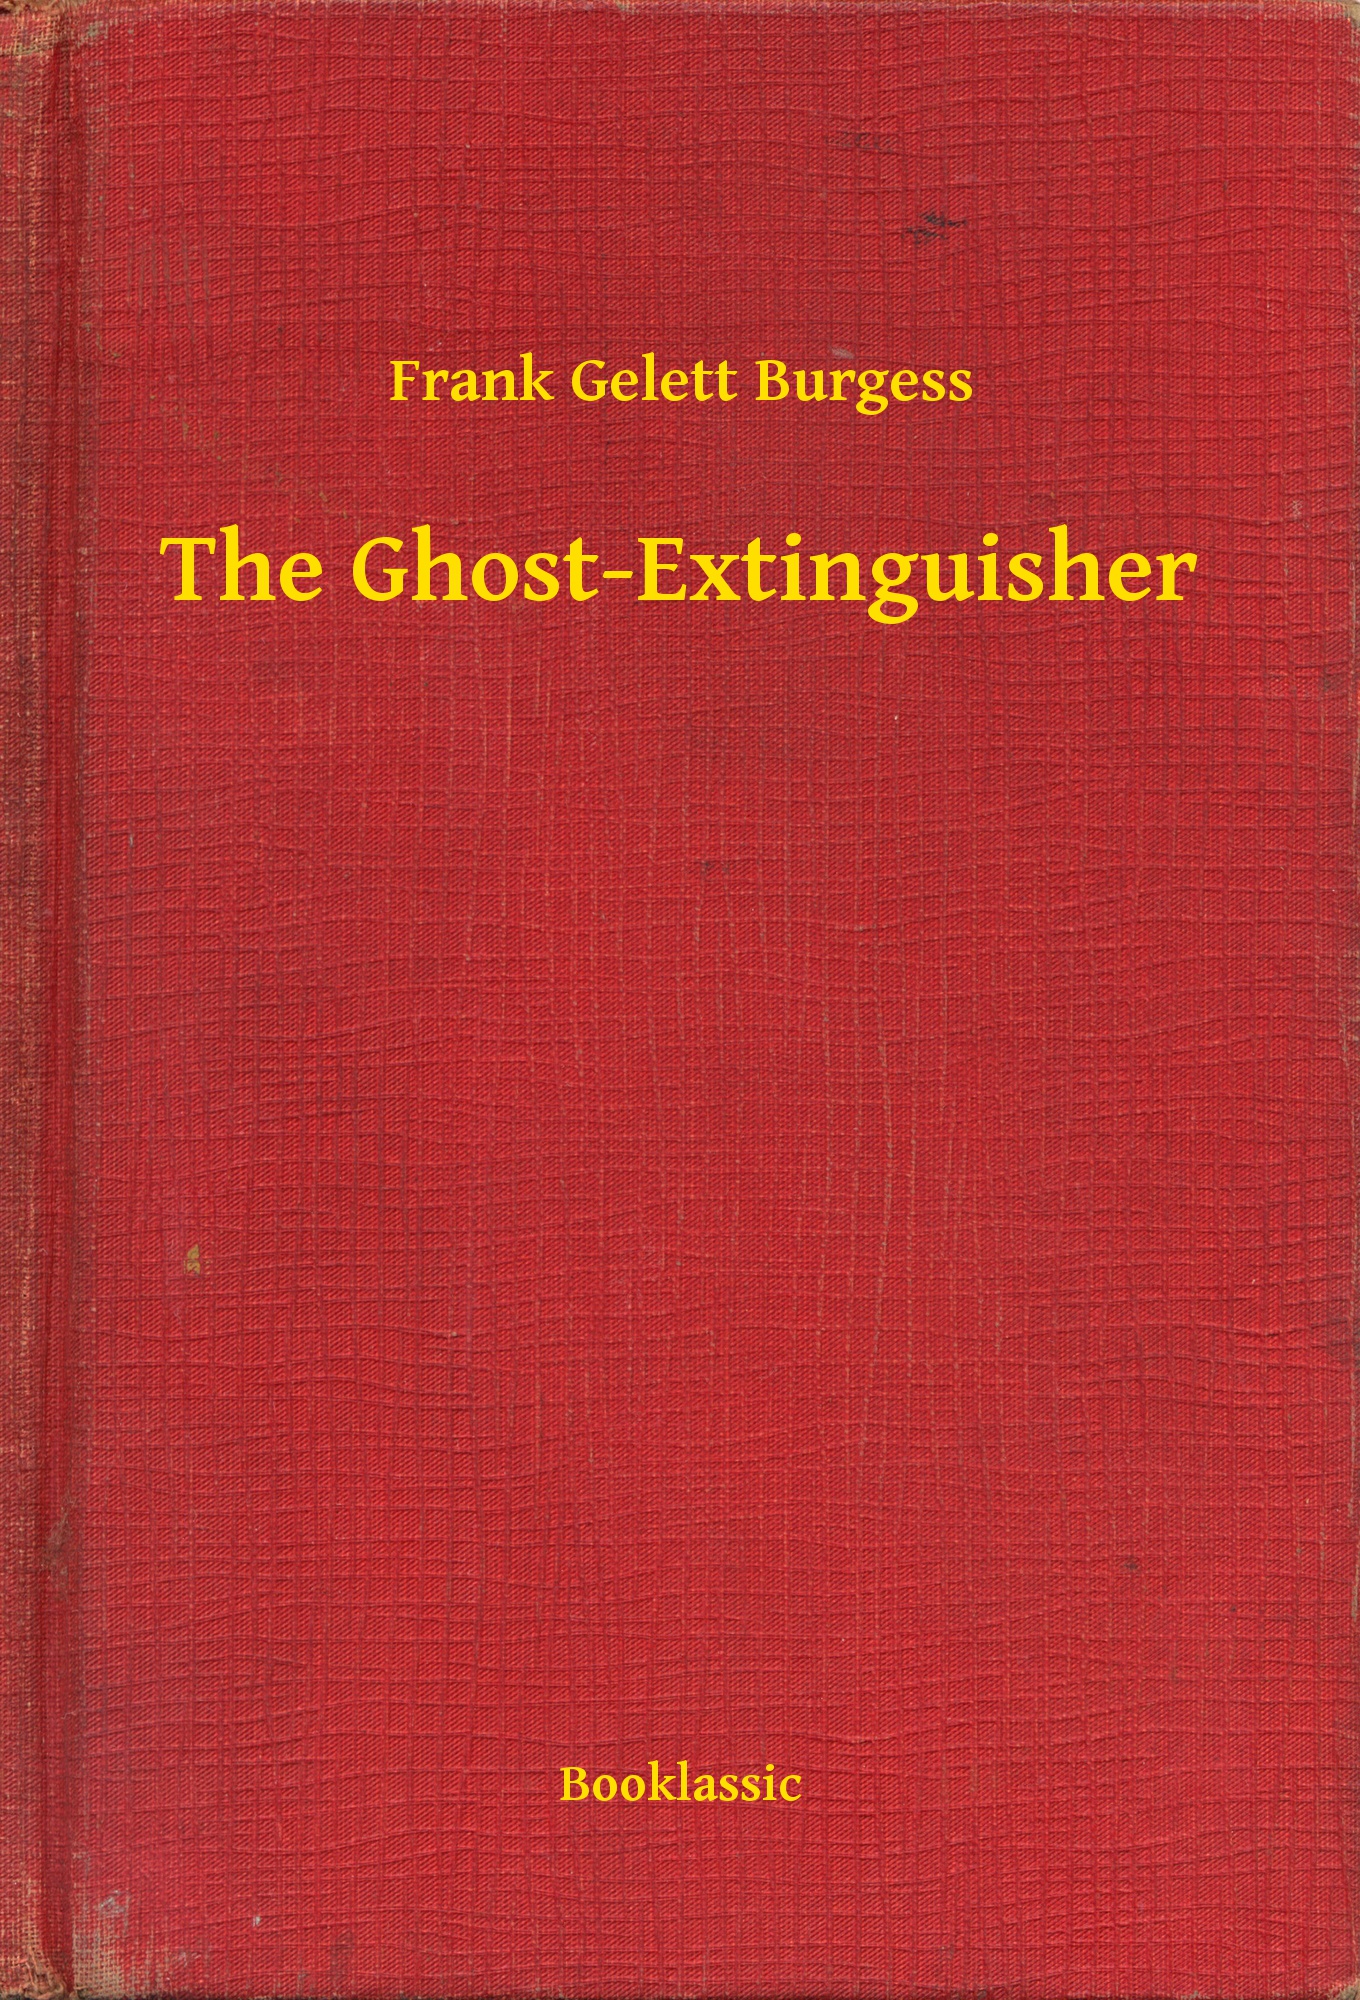 The Ghost-Extinguisher